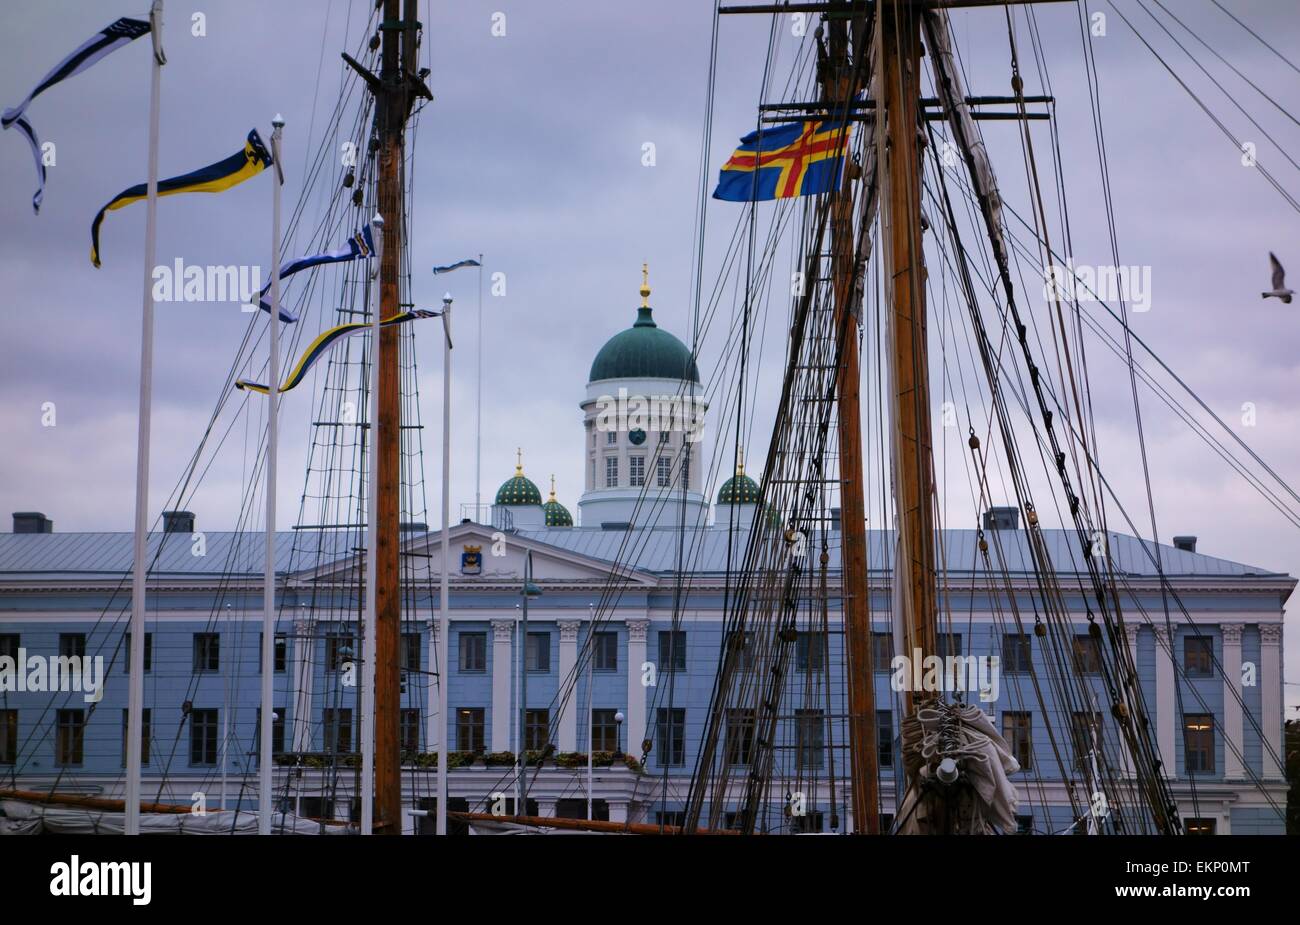 Helsinki cathedral and city hall behind masts Stock Photo